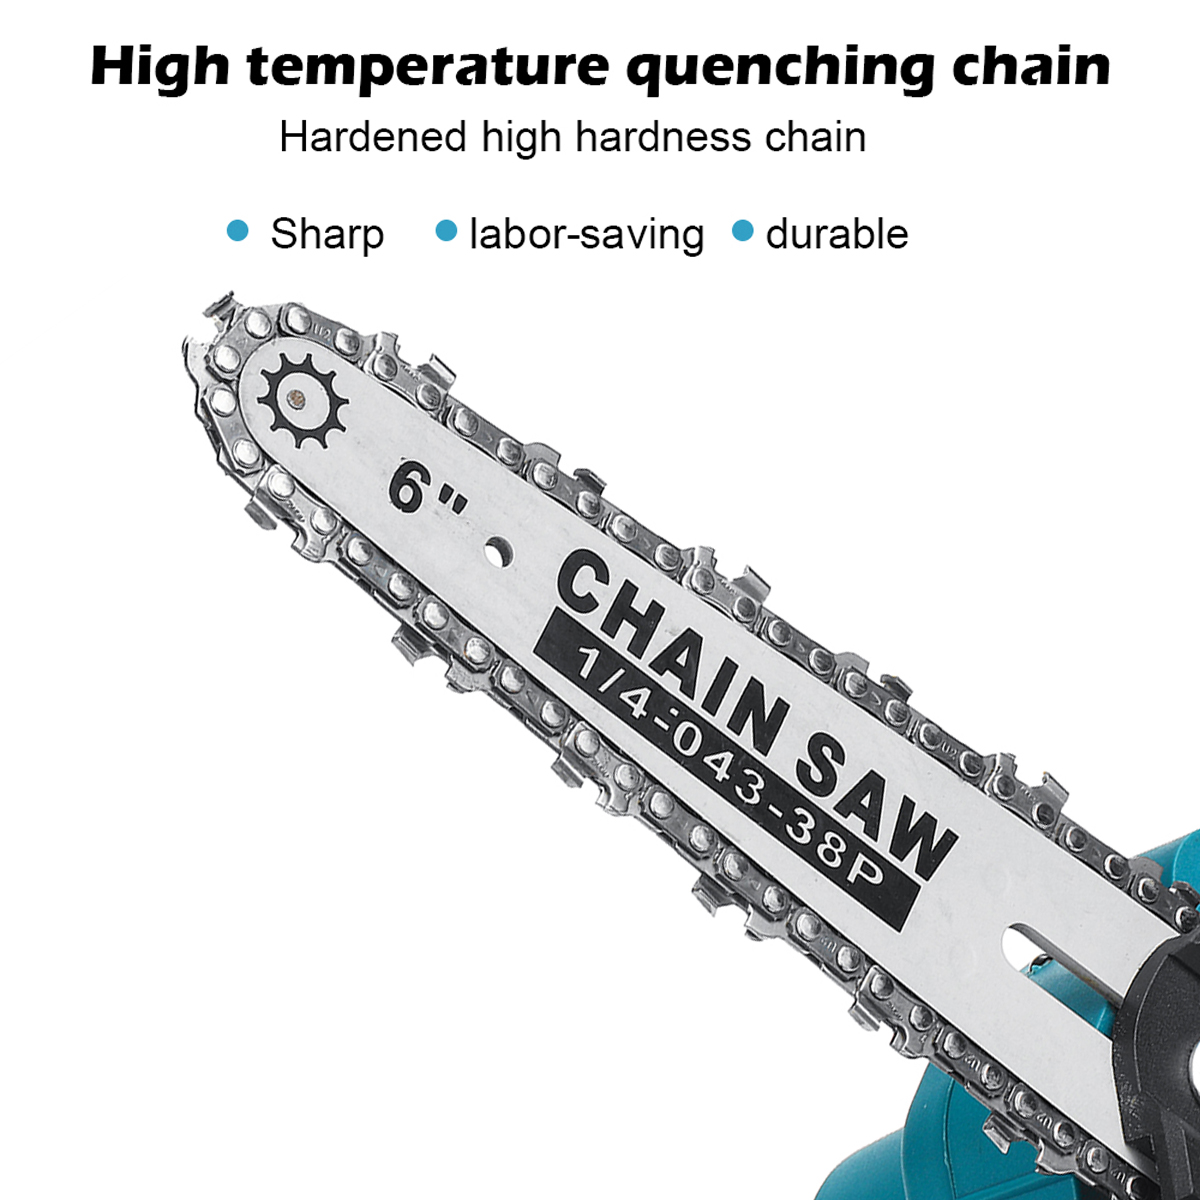 6-Inch-Electric-Chain-Saw-Portable-Chainsaws-Cutter-Woodworking-Tool-W-1pc-or-2pcs-Battery-1824775-6